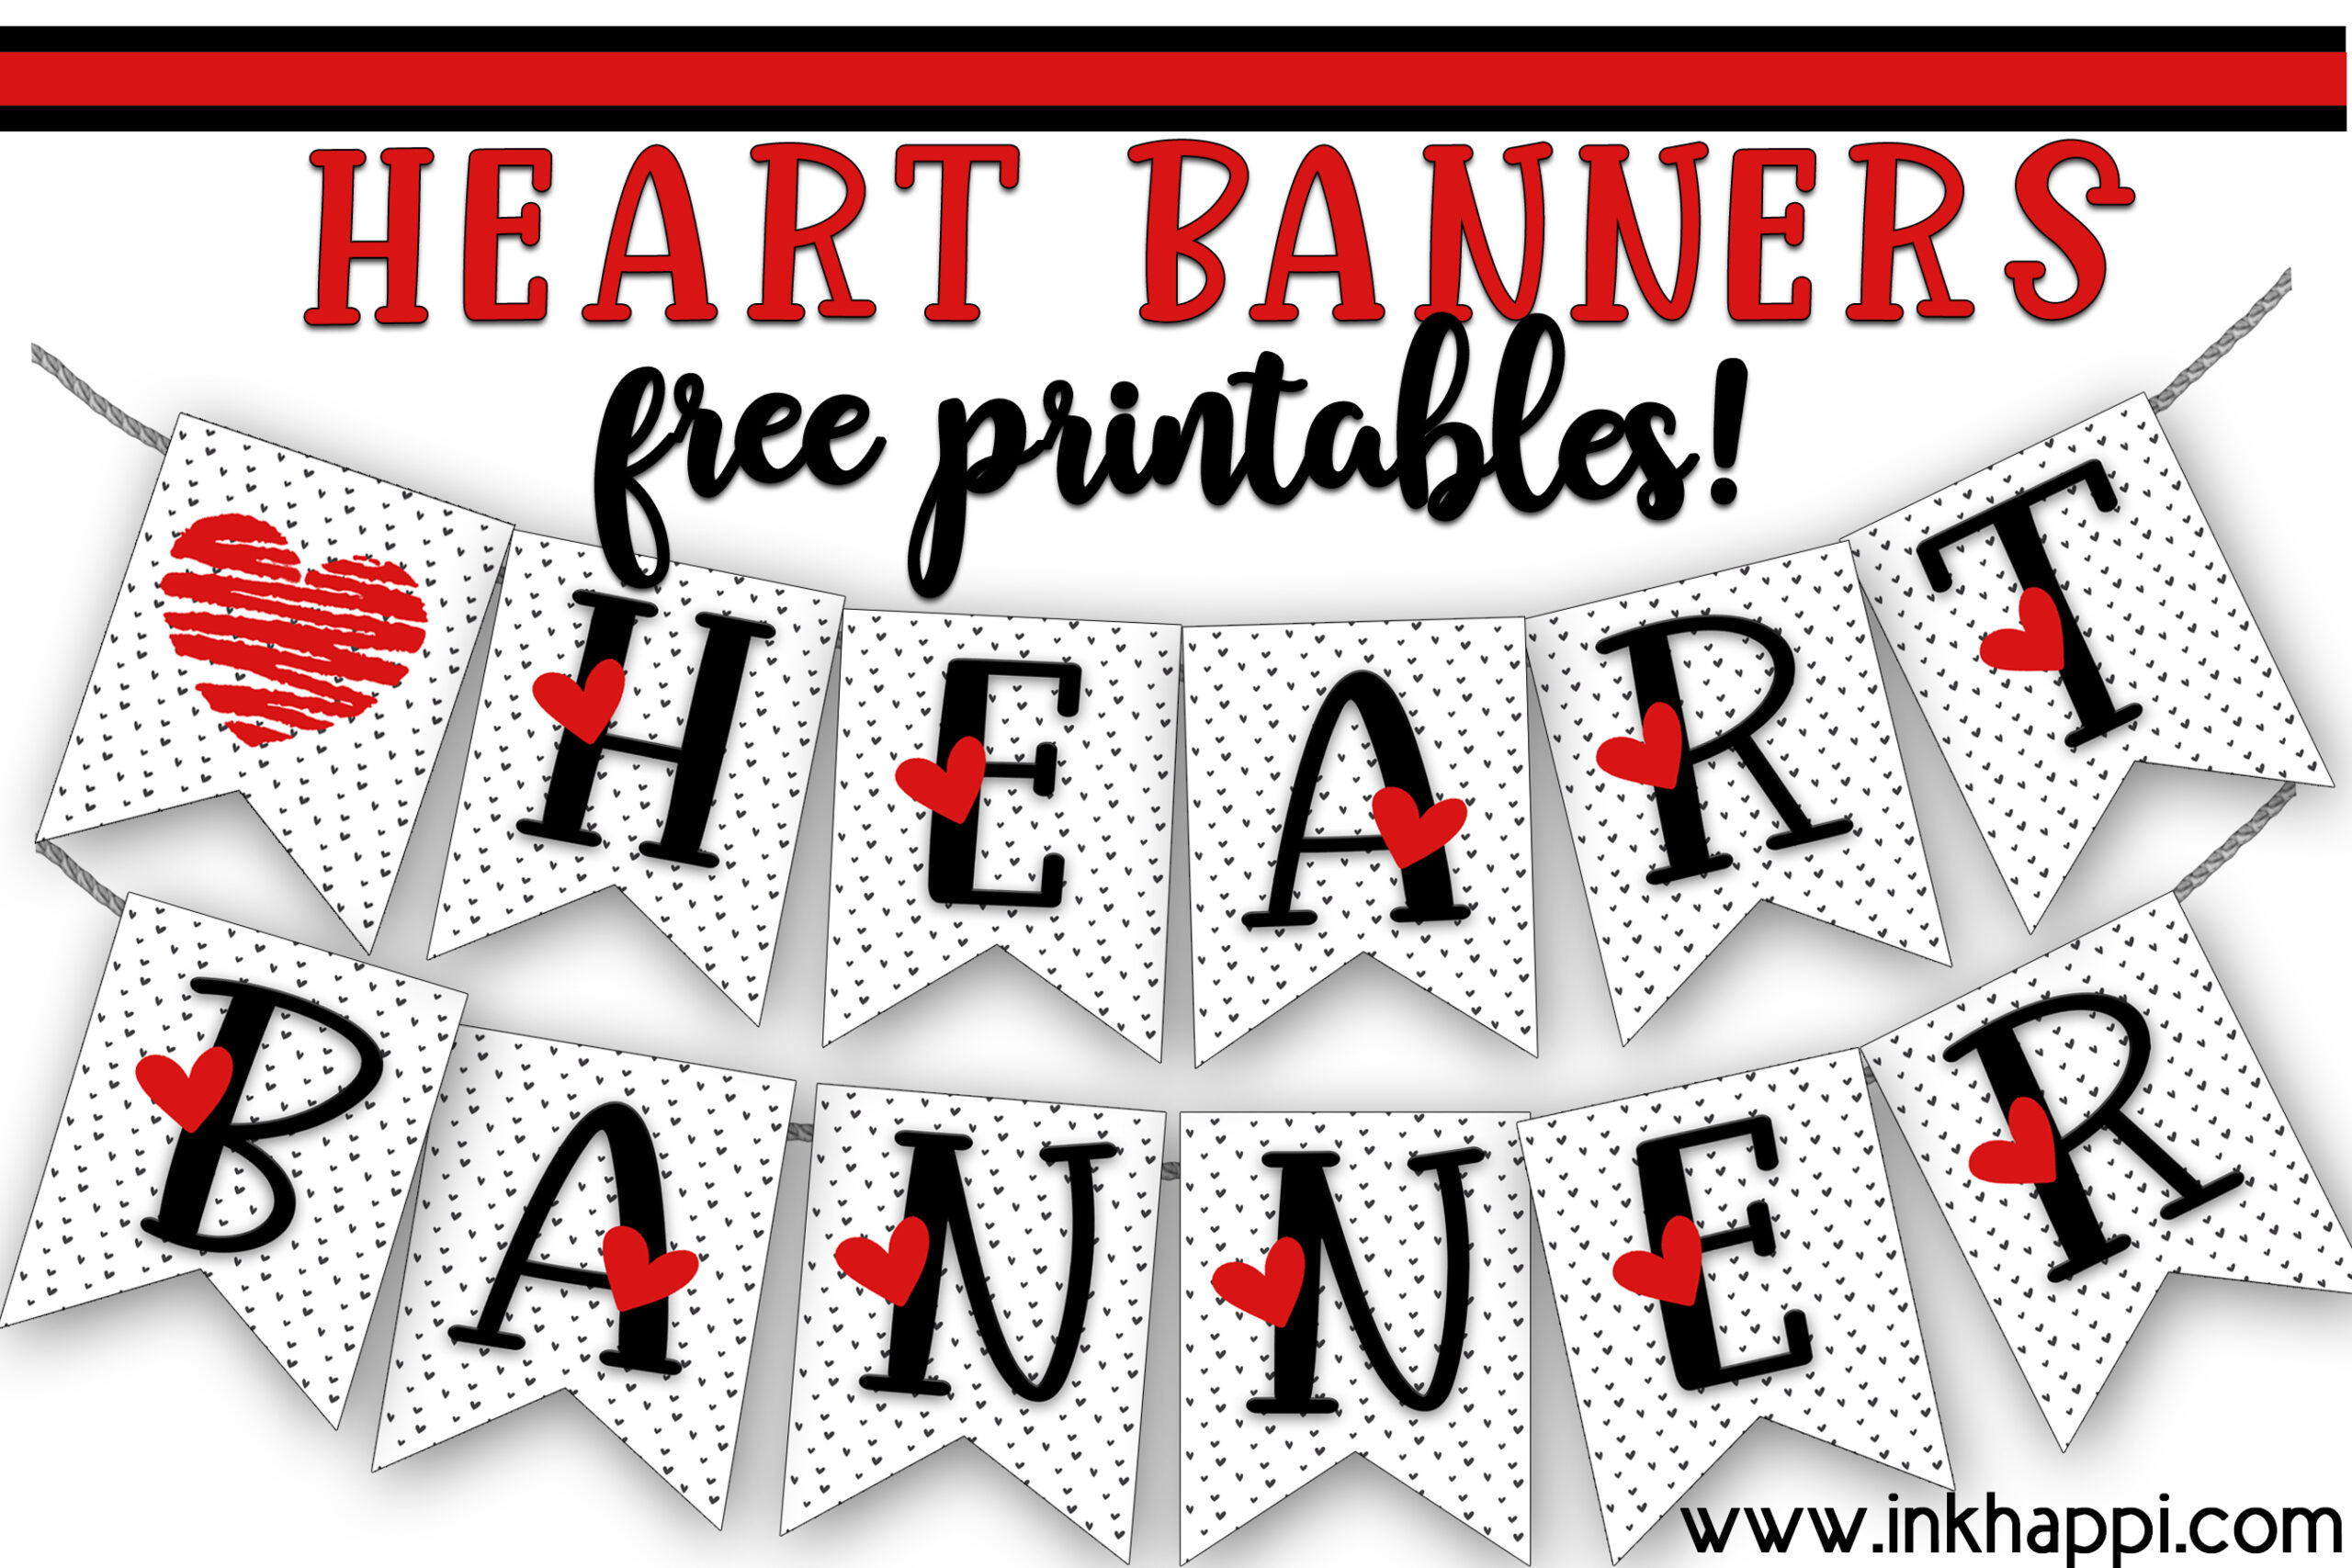 Heart Banner free printables to print and share the love! inkhappi